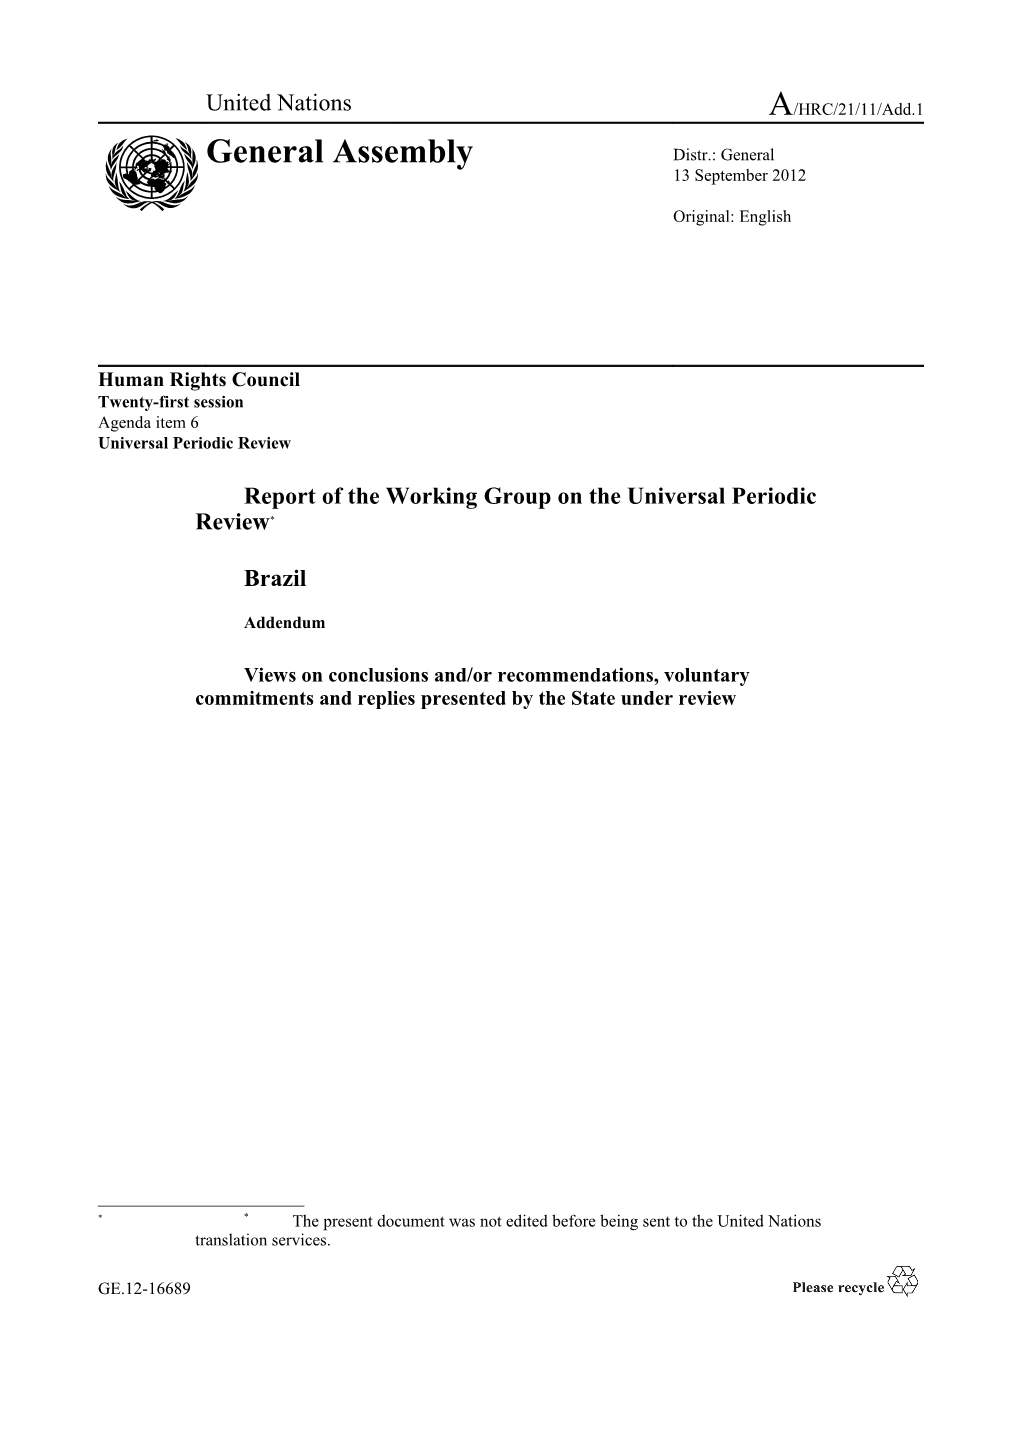 Report of the Working Group on the UPR - Brazil - Addendum - English